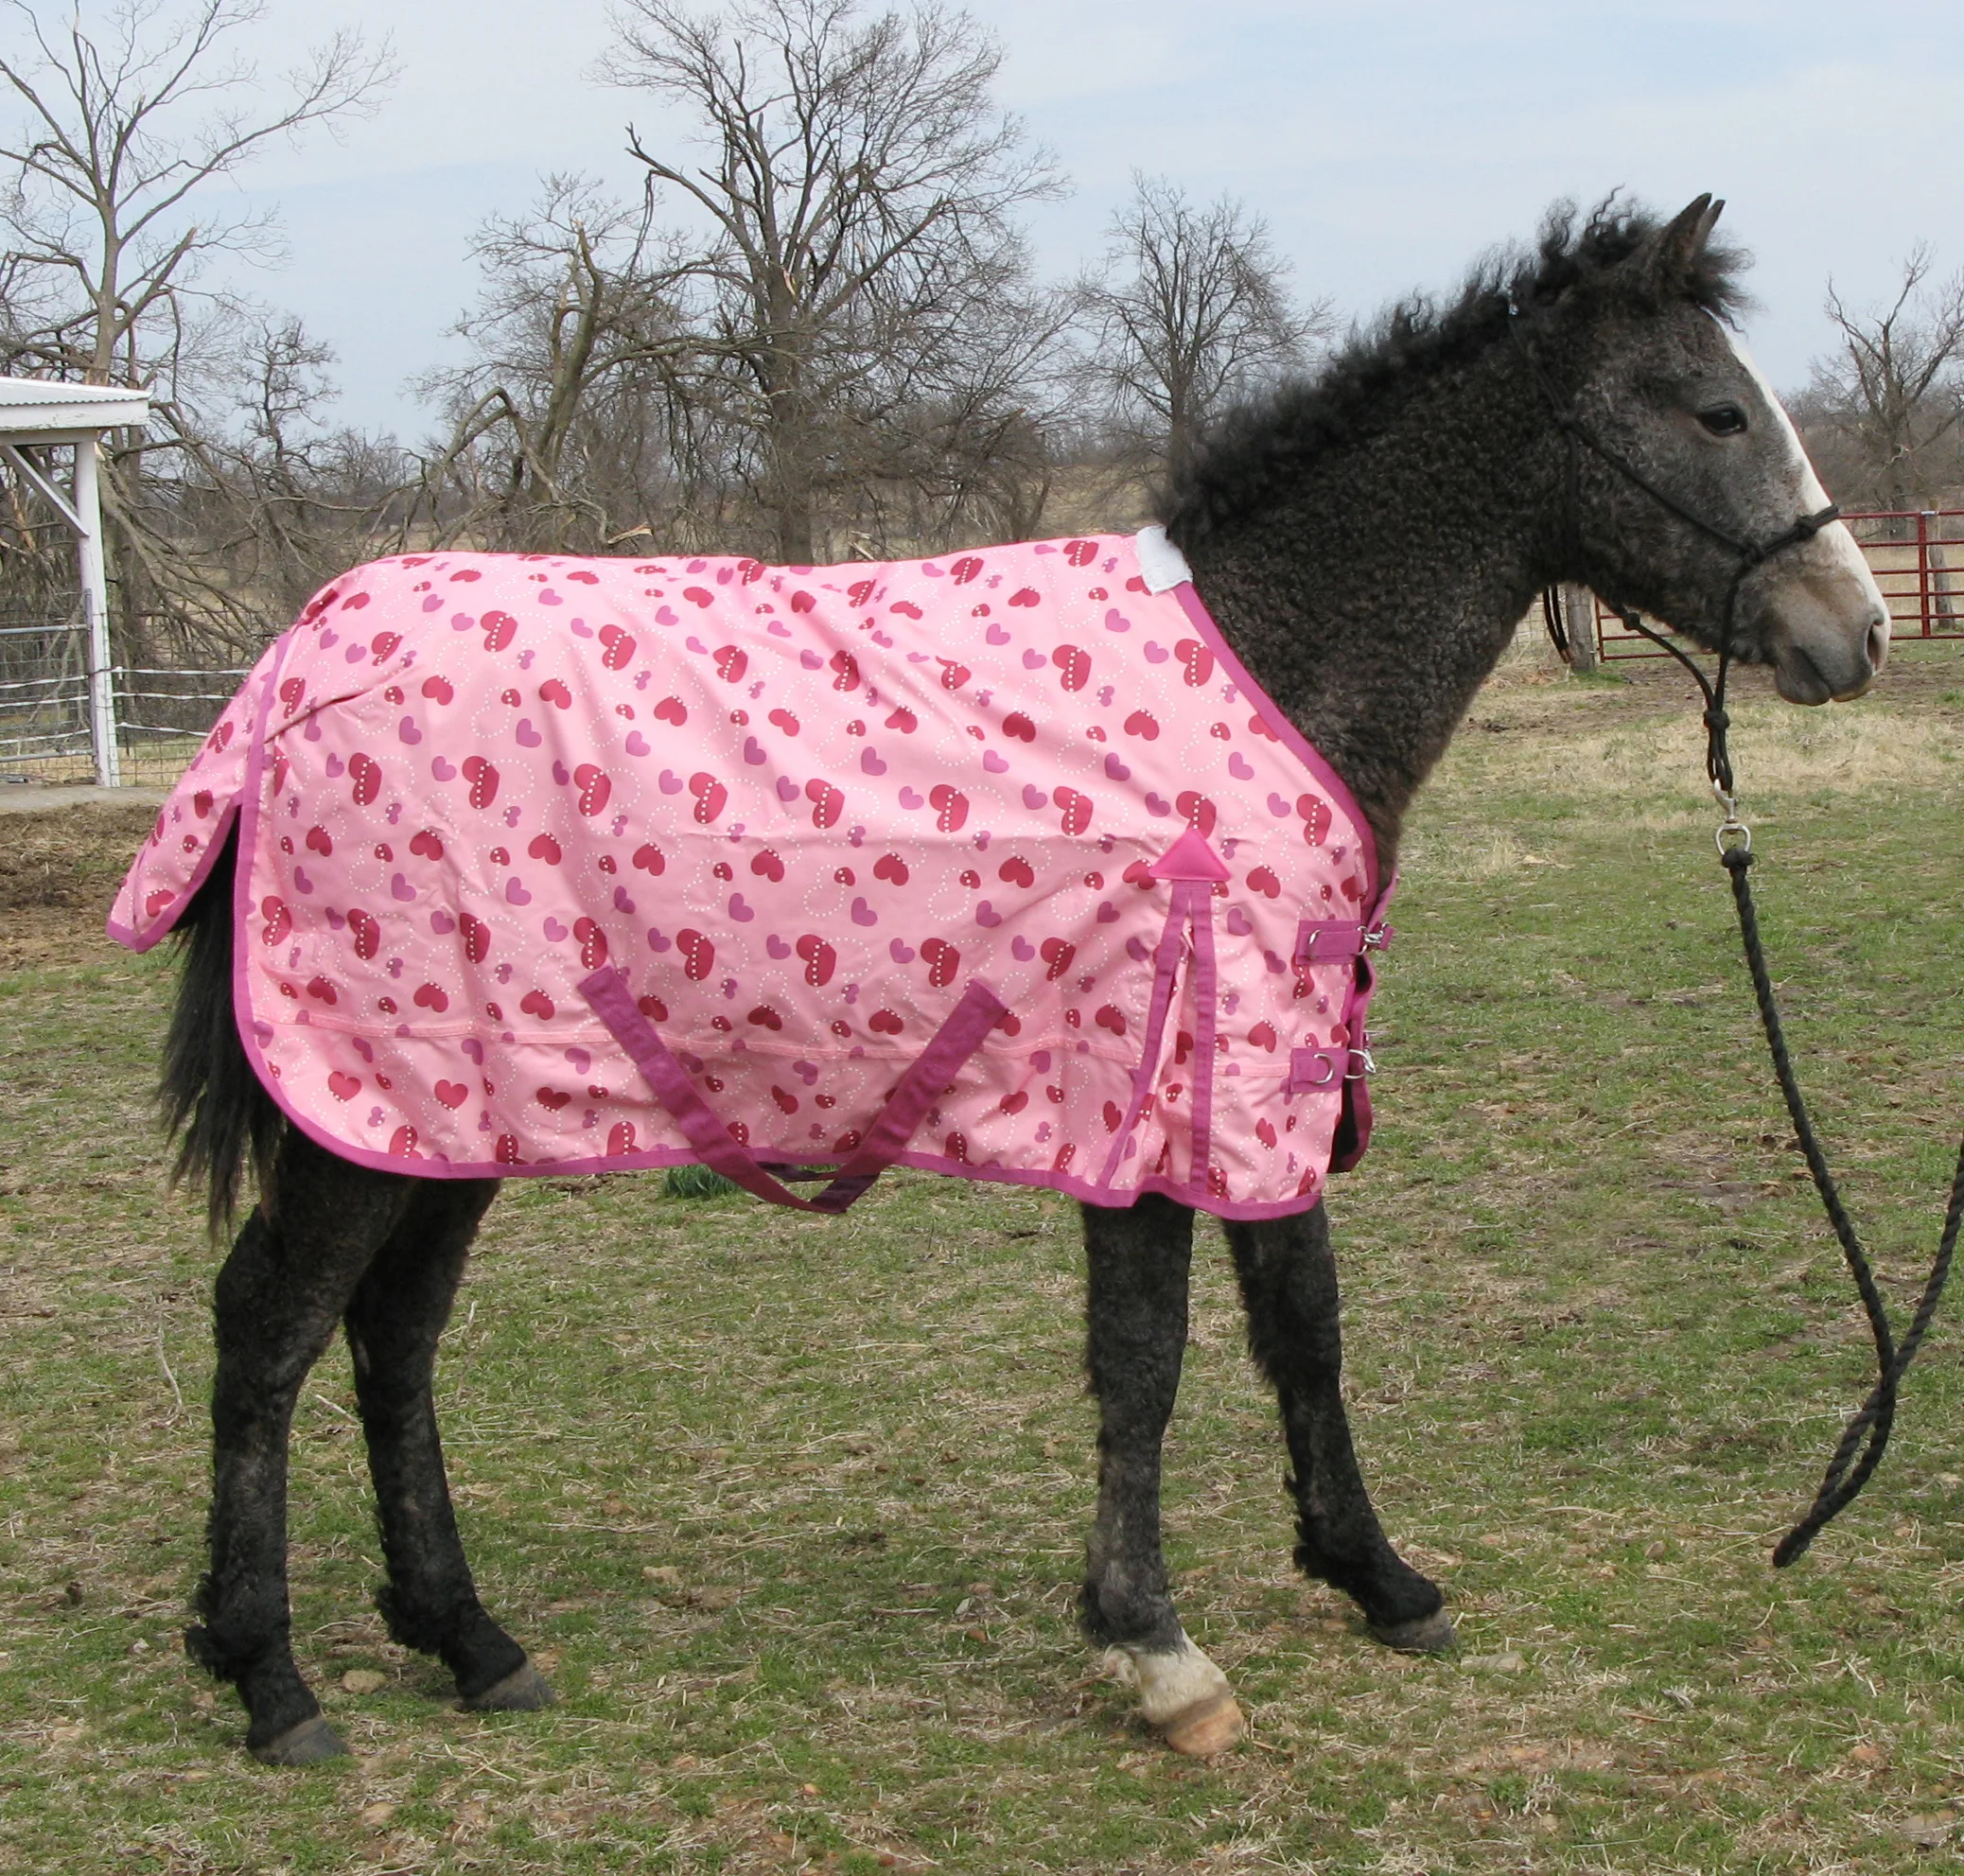 A horse in a pink blanket.